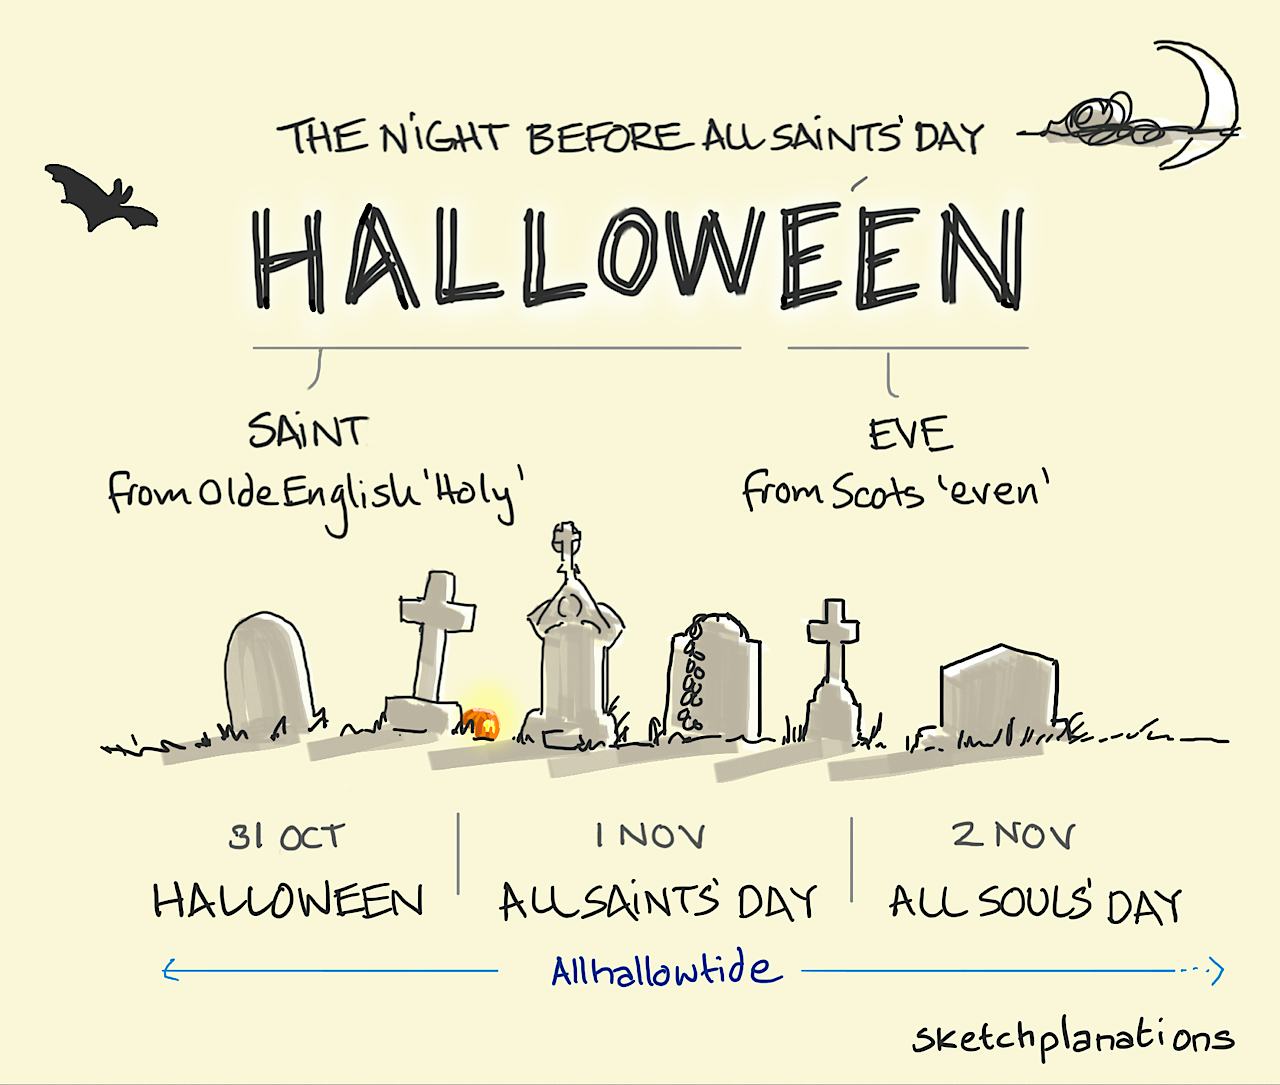 A graveyard with the timeline of Halloween, All Saints Day and All Souls day after